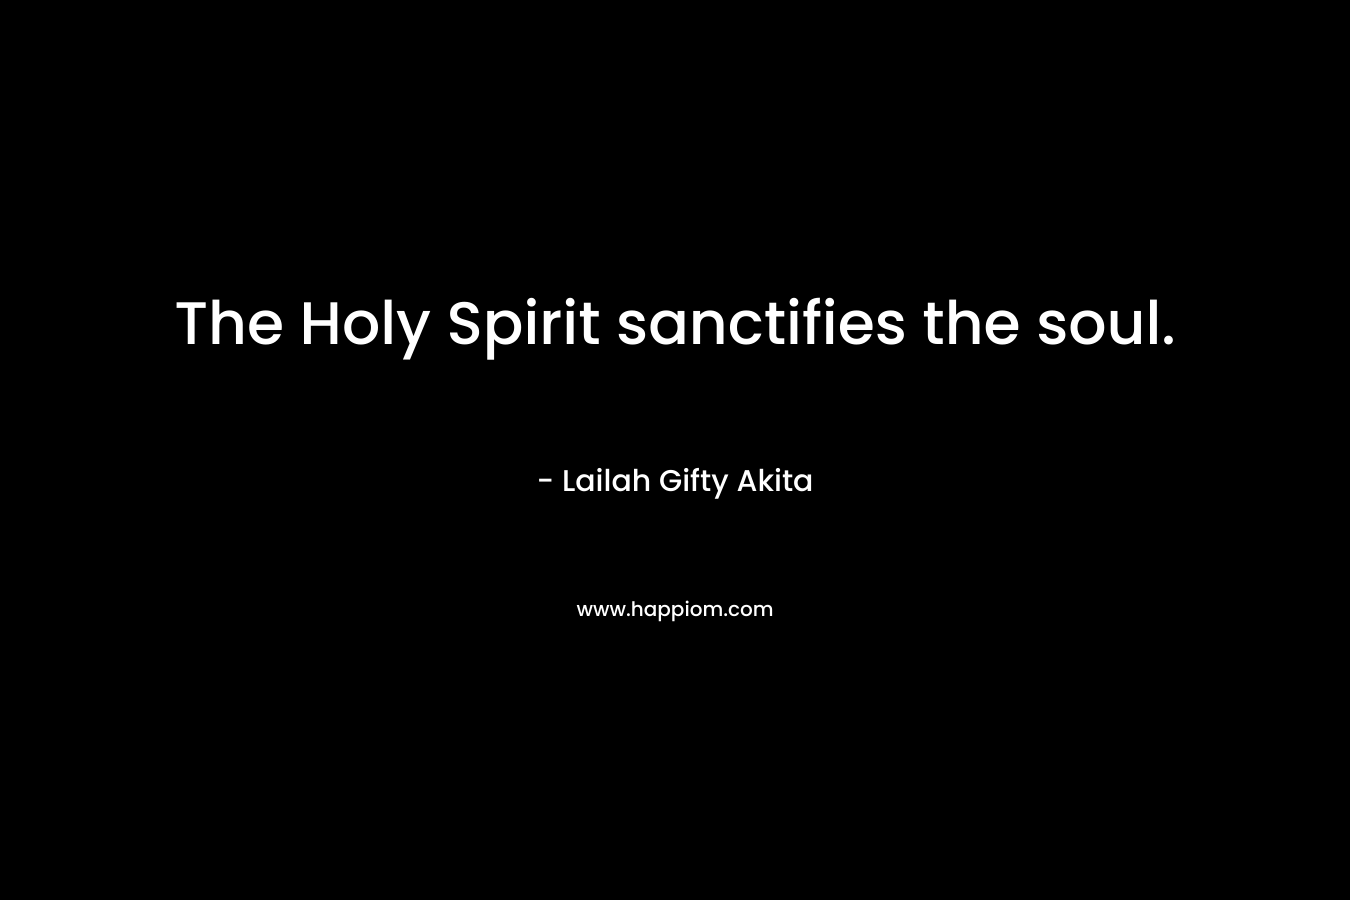 The Holy Spirit sanctifies the soul.